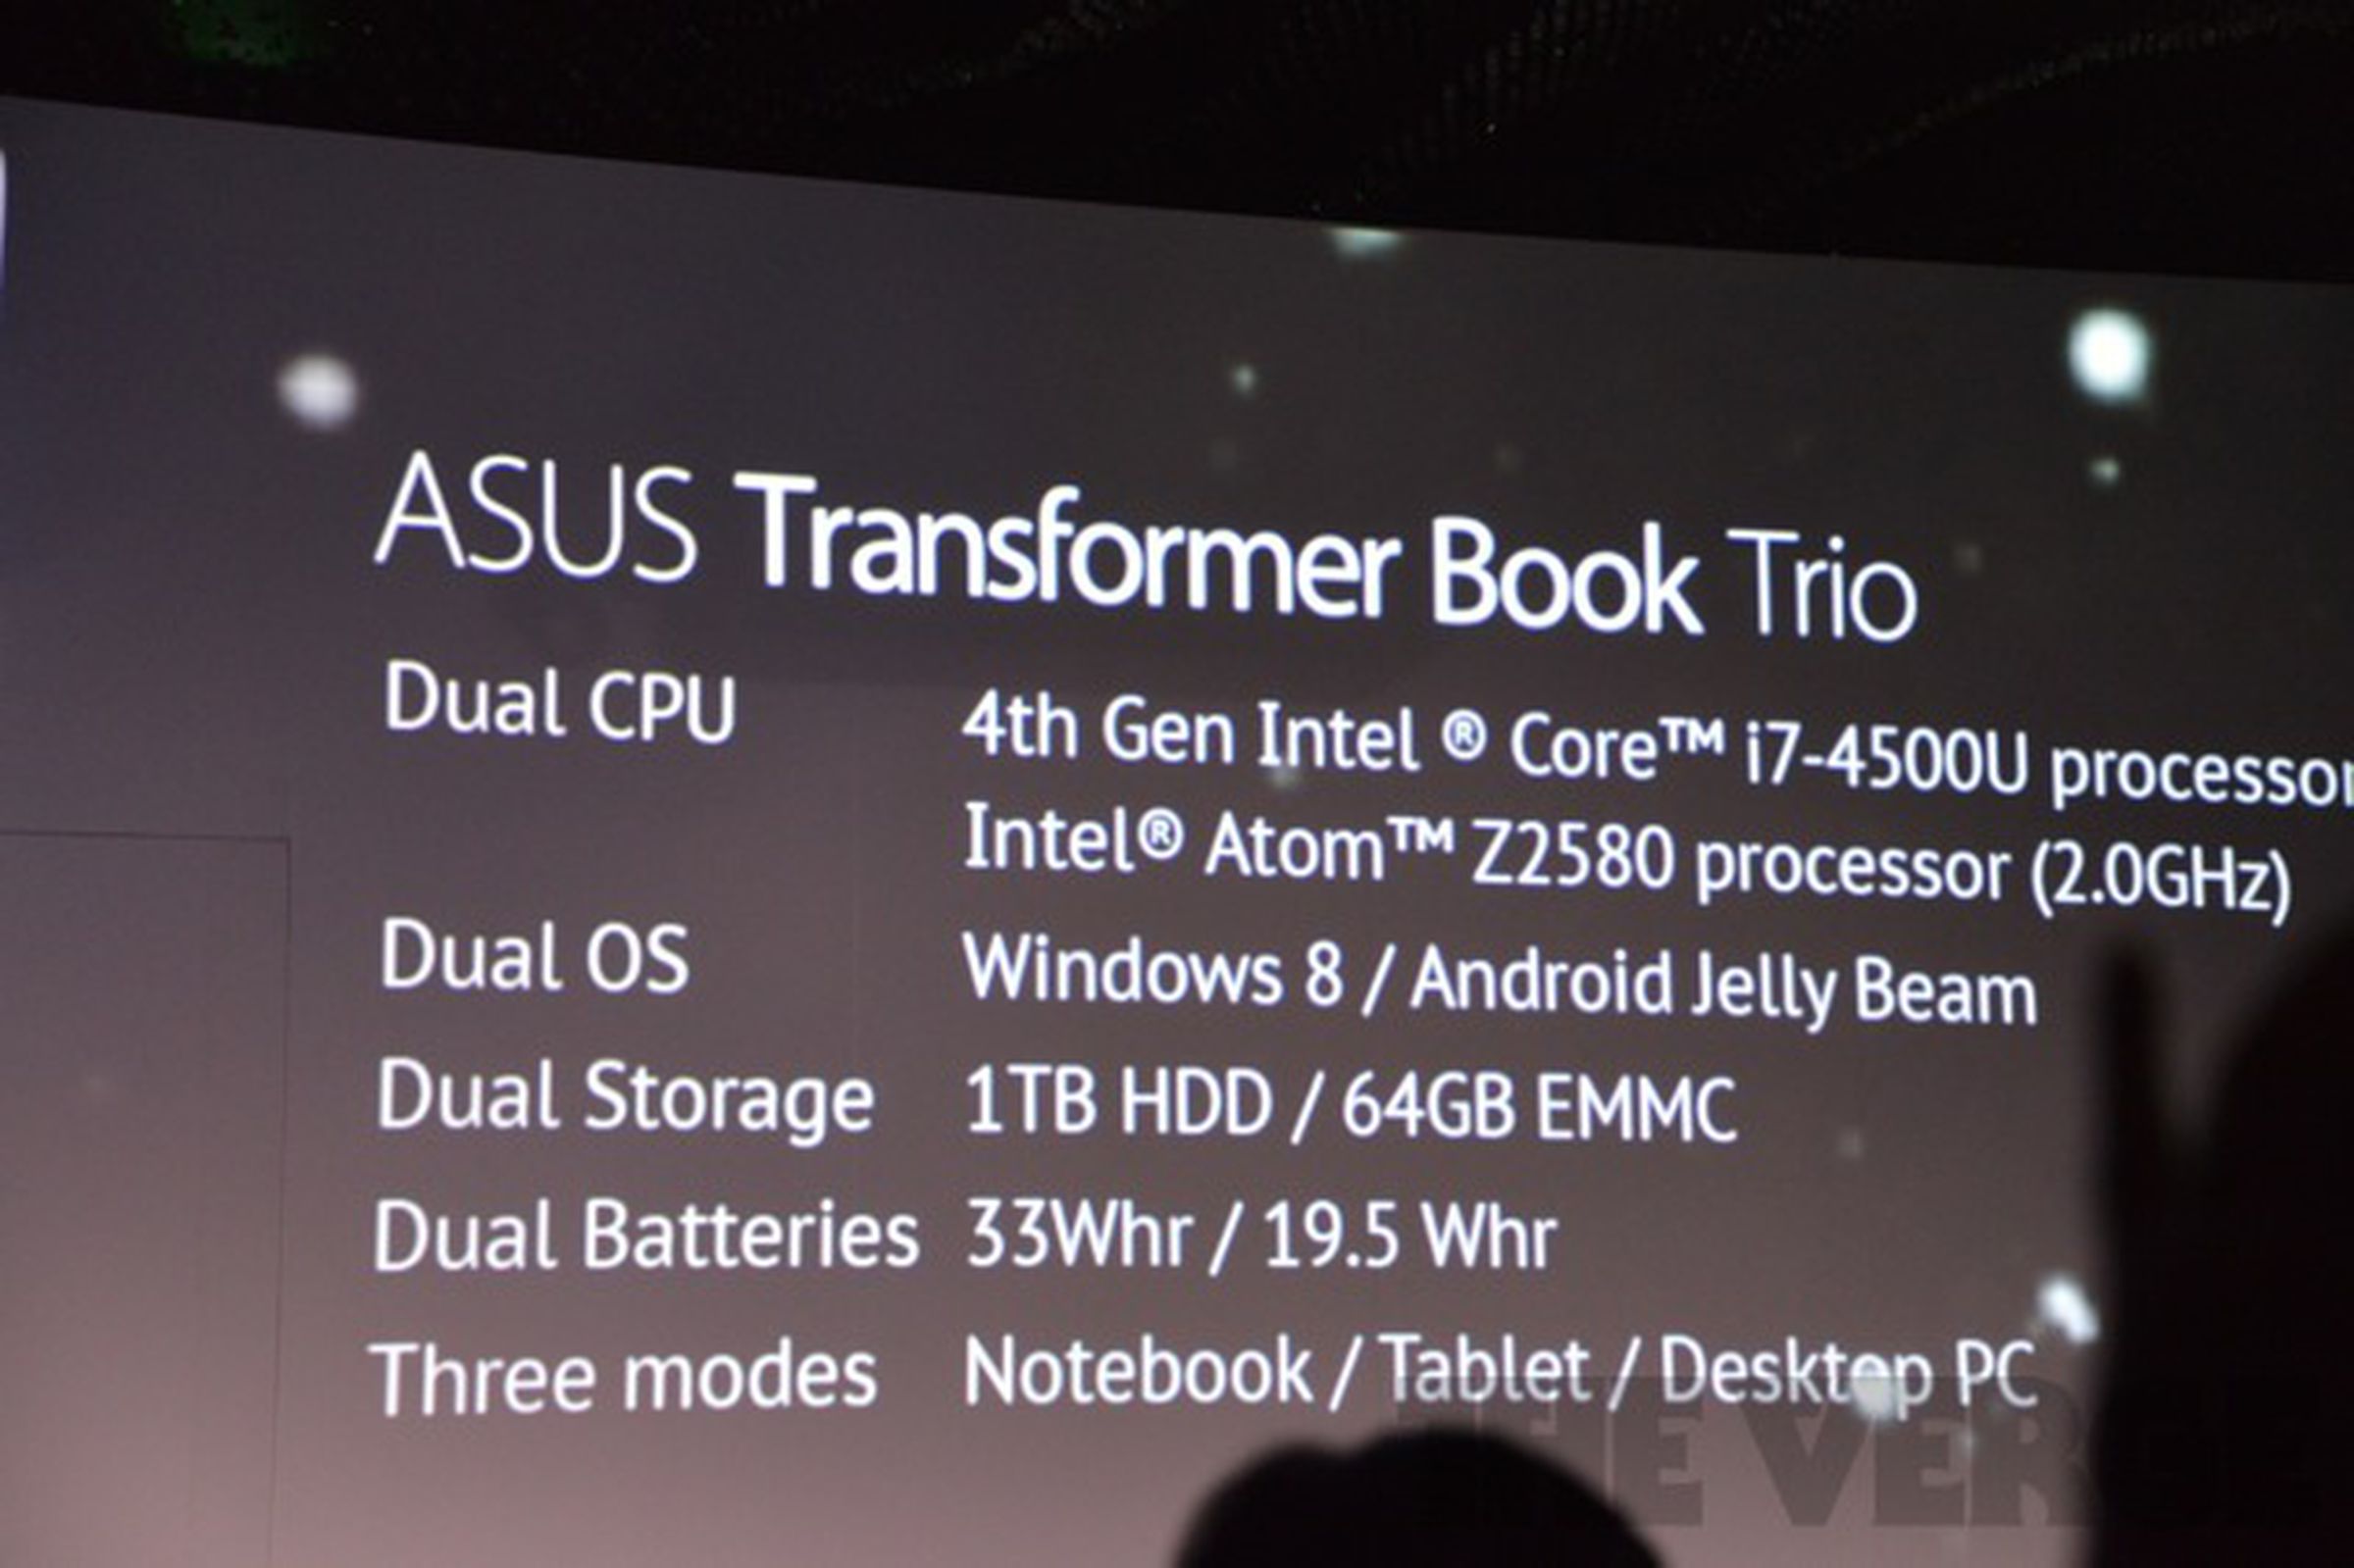 Asus Transformer Book Trio hands-on and press pictures